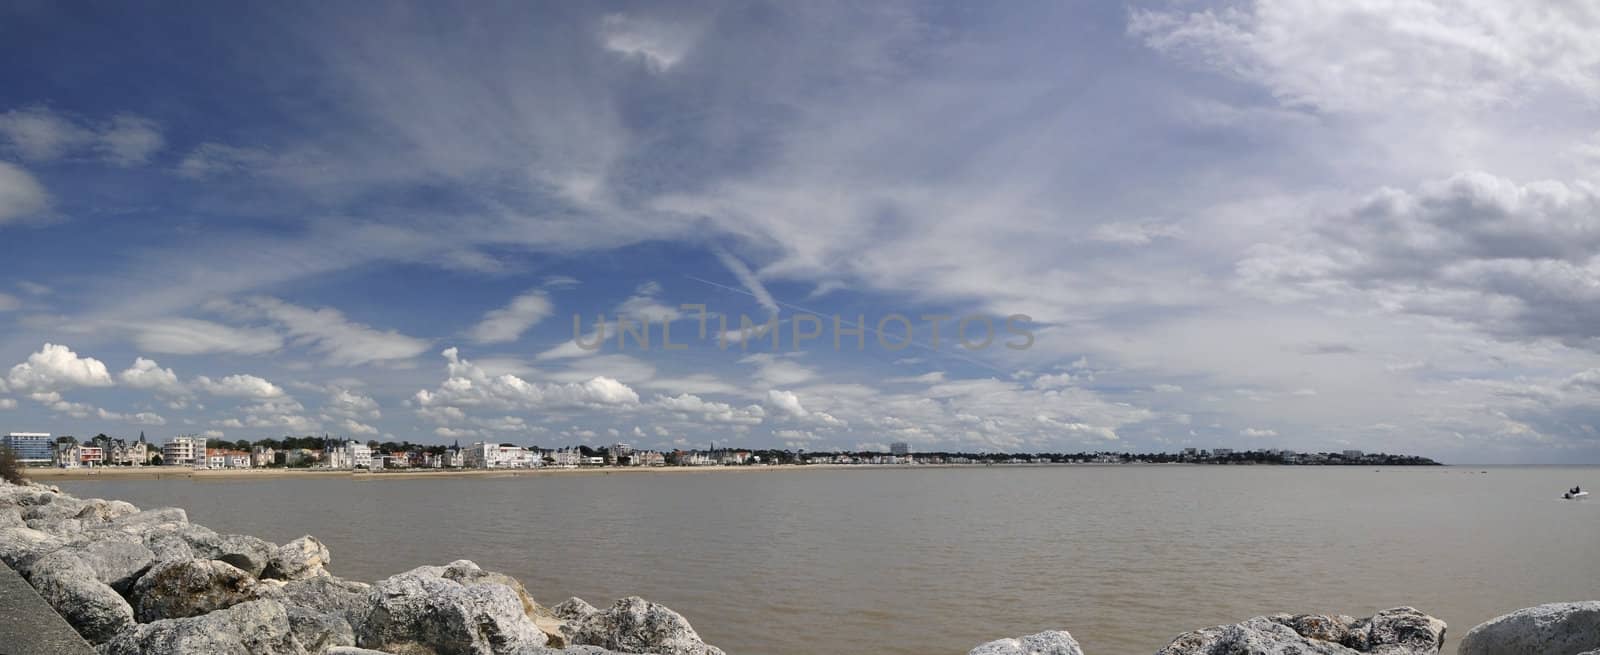 Royan Bay with Blue and Cloudy Sky by shkyo30